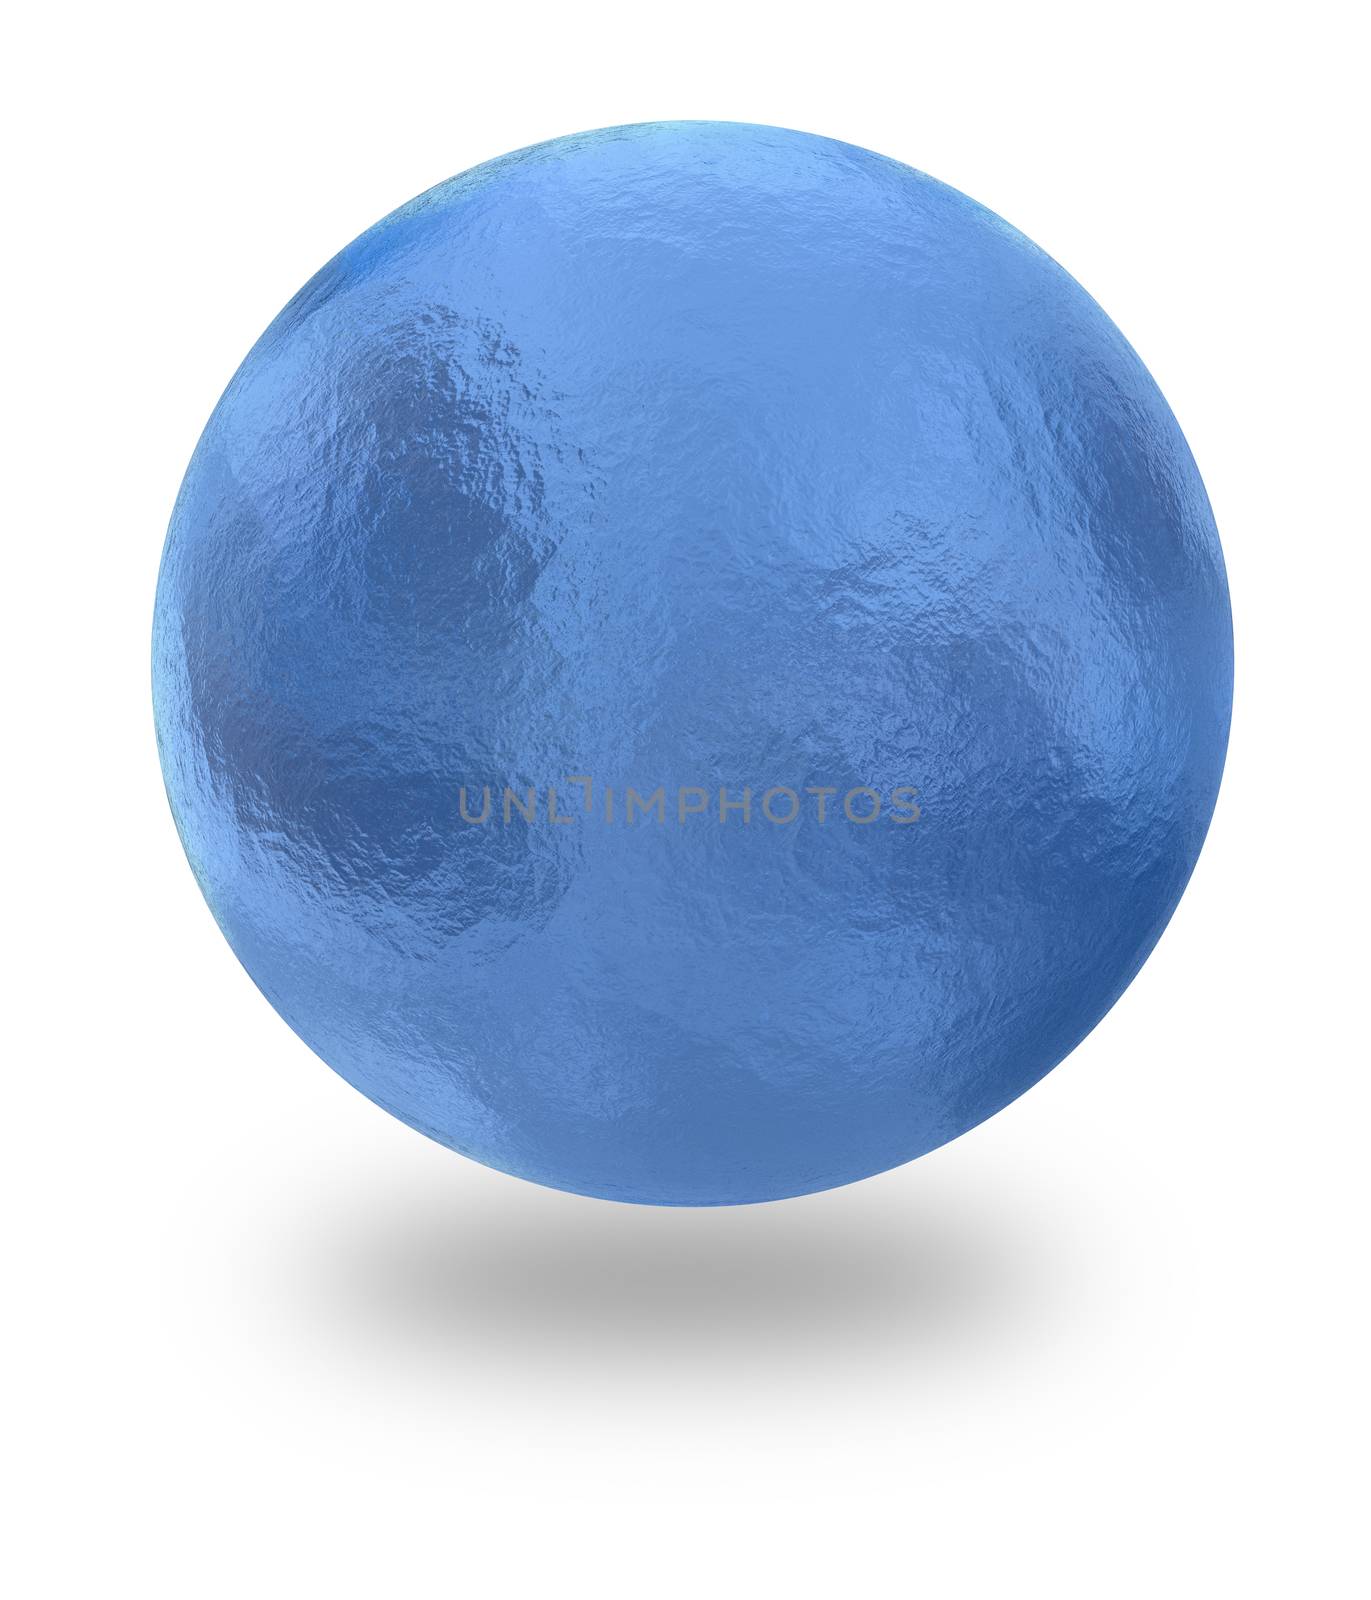 Illustration of water sphere isolated on white background